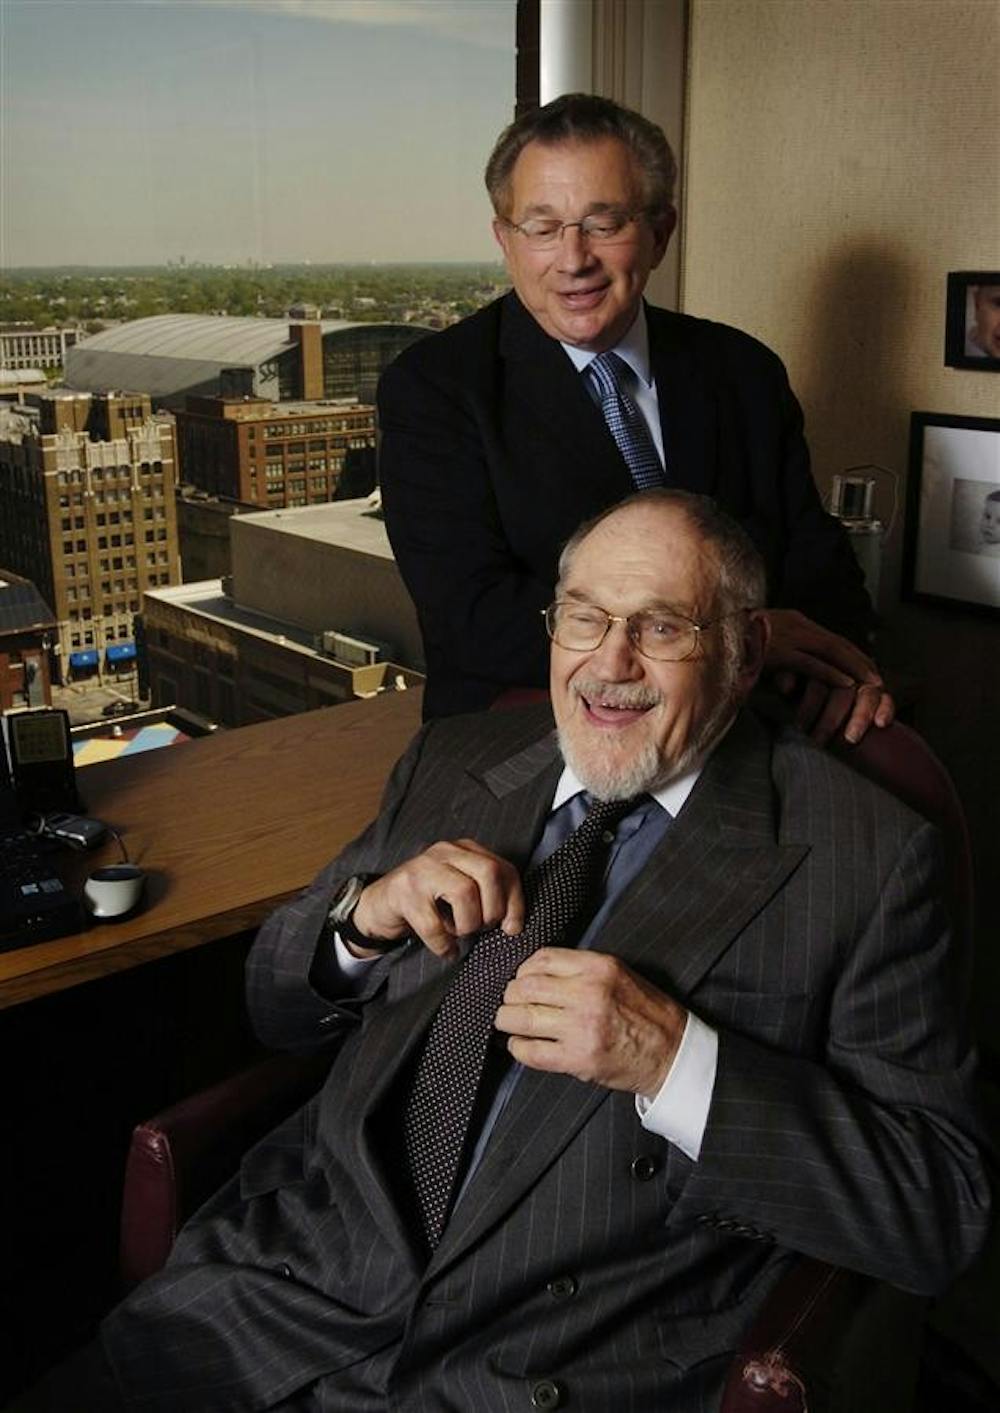 In this May 5, 2004 photo, Mel Simon, foreground, and his brother, Herb, pose in their office in Indianapolis. A spokesman says billionaire shopping mall magnate and Indiana Pacers co-owner Mel Simon died Wednesday, Sept. 16, 2009. He was 82. (AP Photo/Indianapolis Star, Matt Kryger)